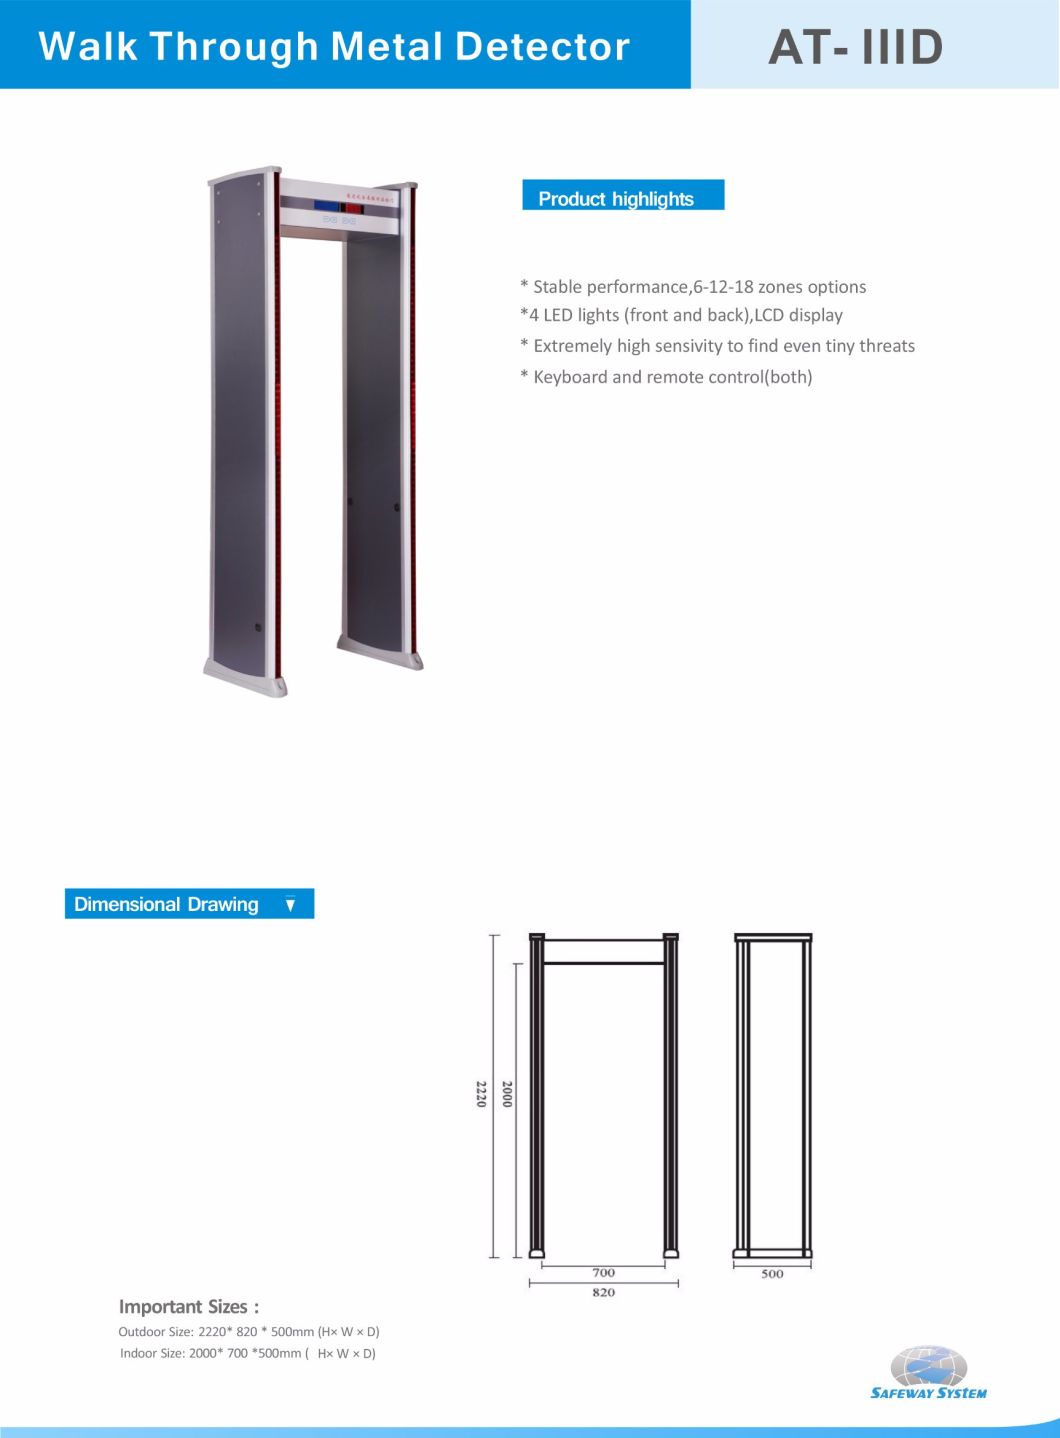 Metal Detection & Safety Inspection Door or Safety Inspection Door